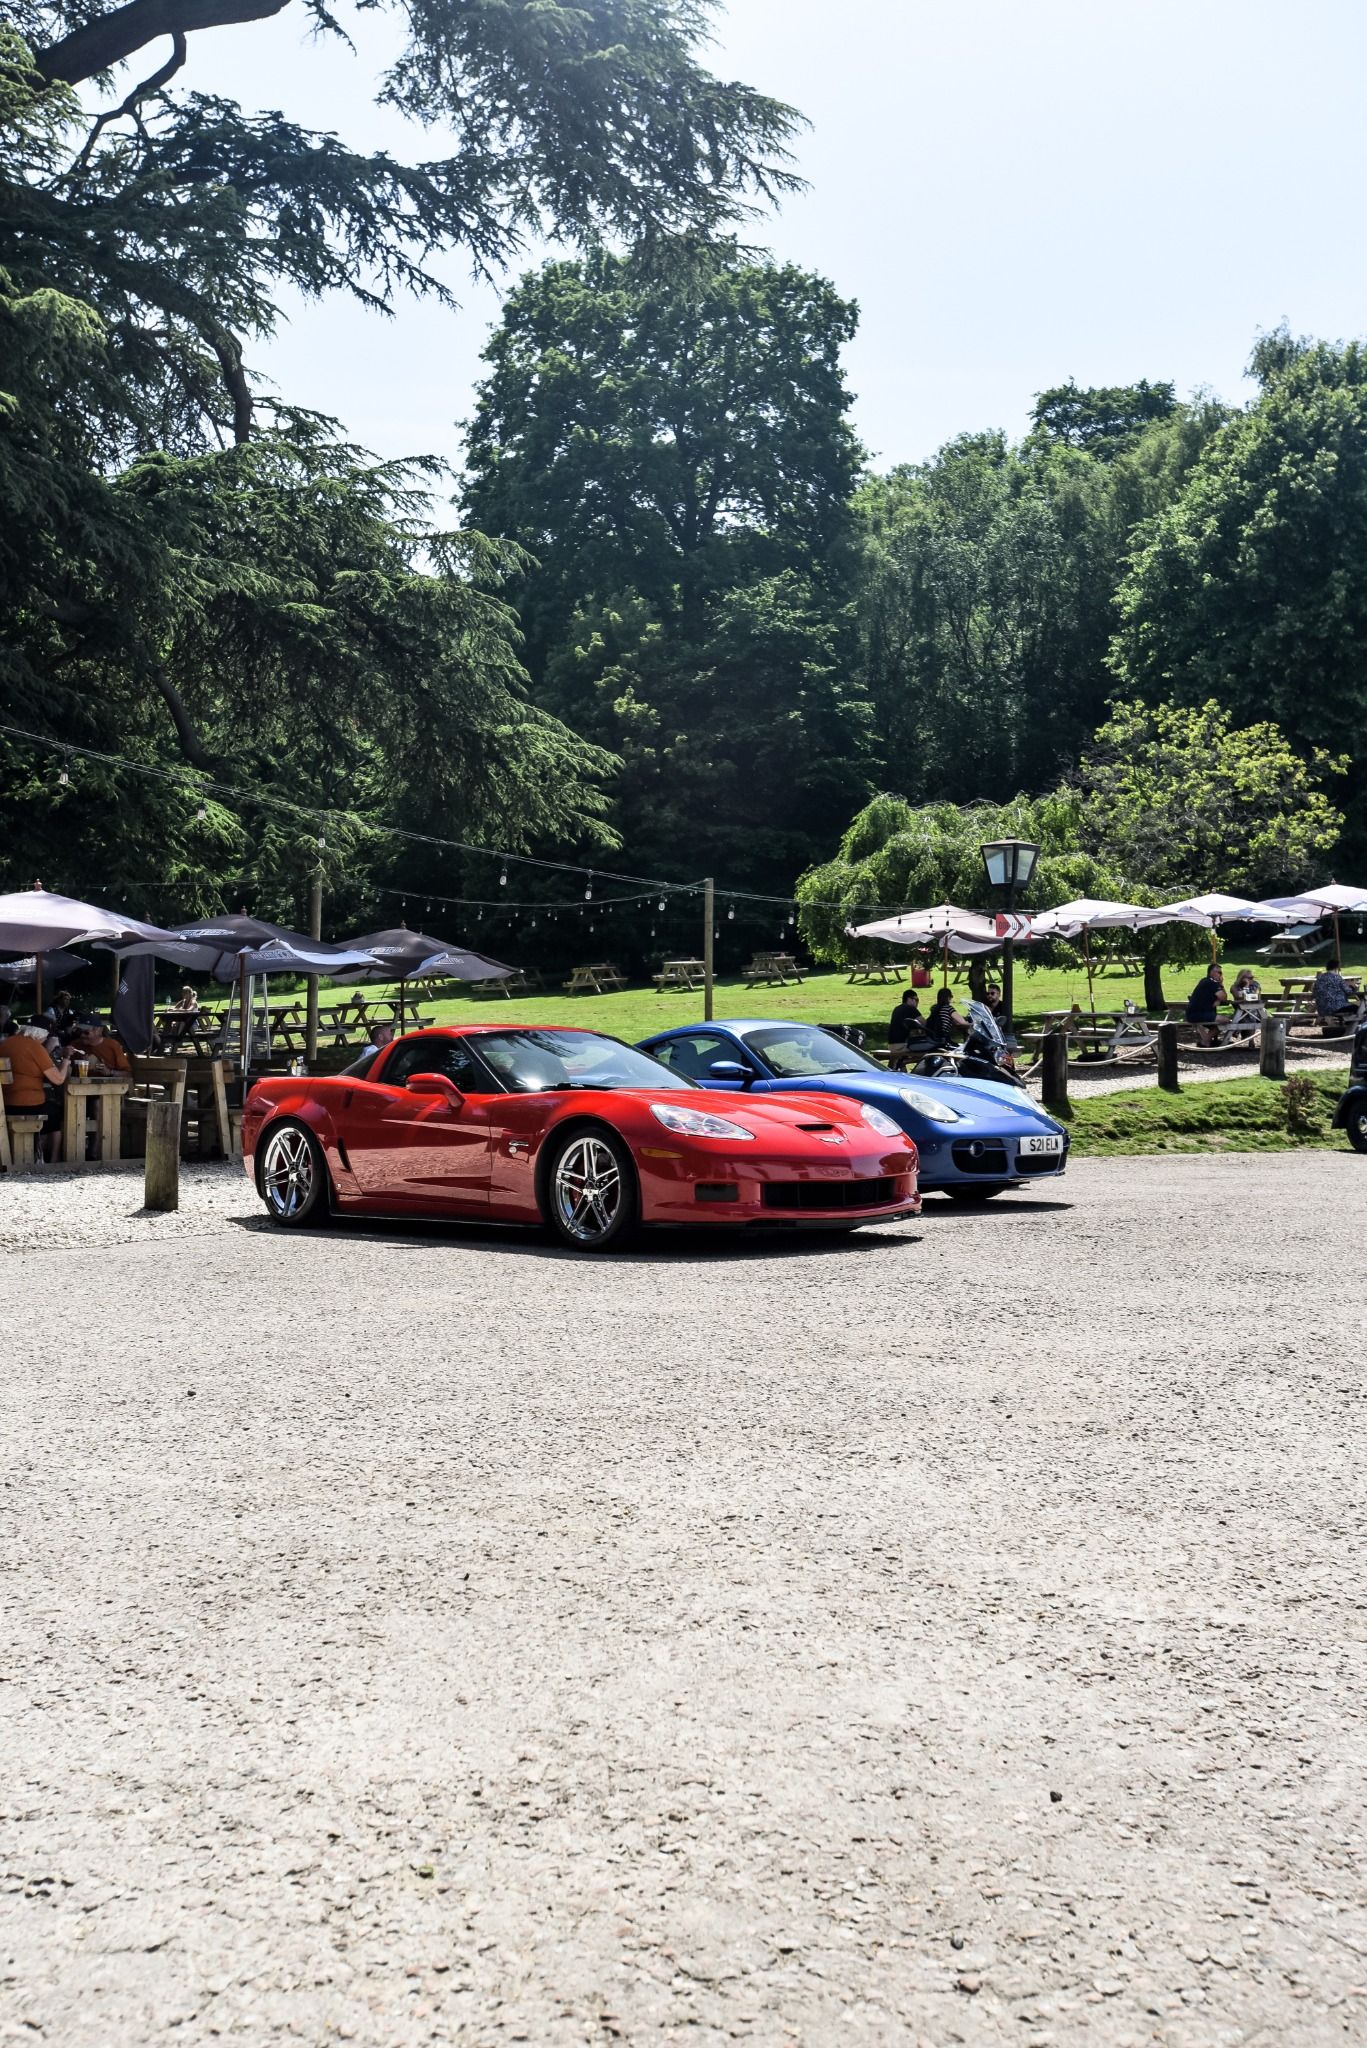 Red and Blue sports cars in front of picnic benches and grass